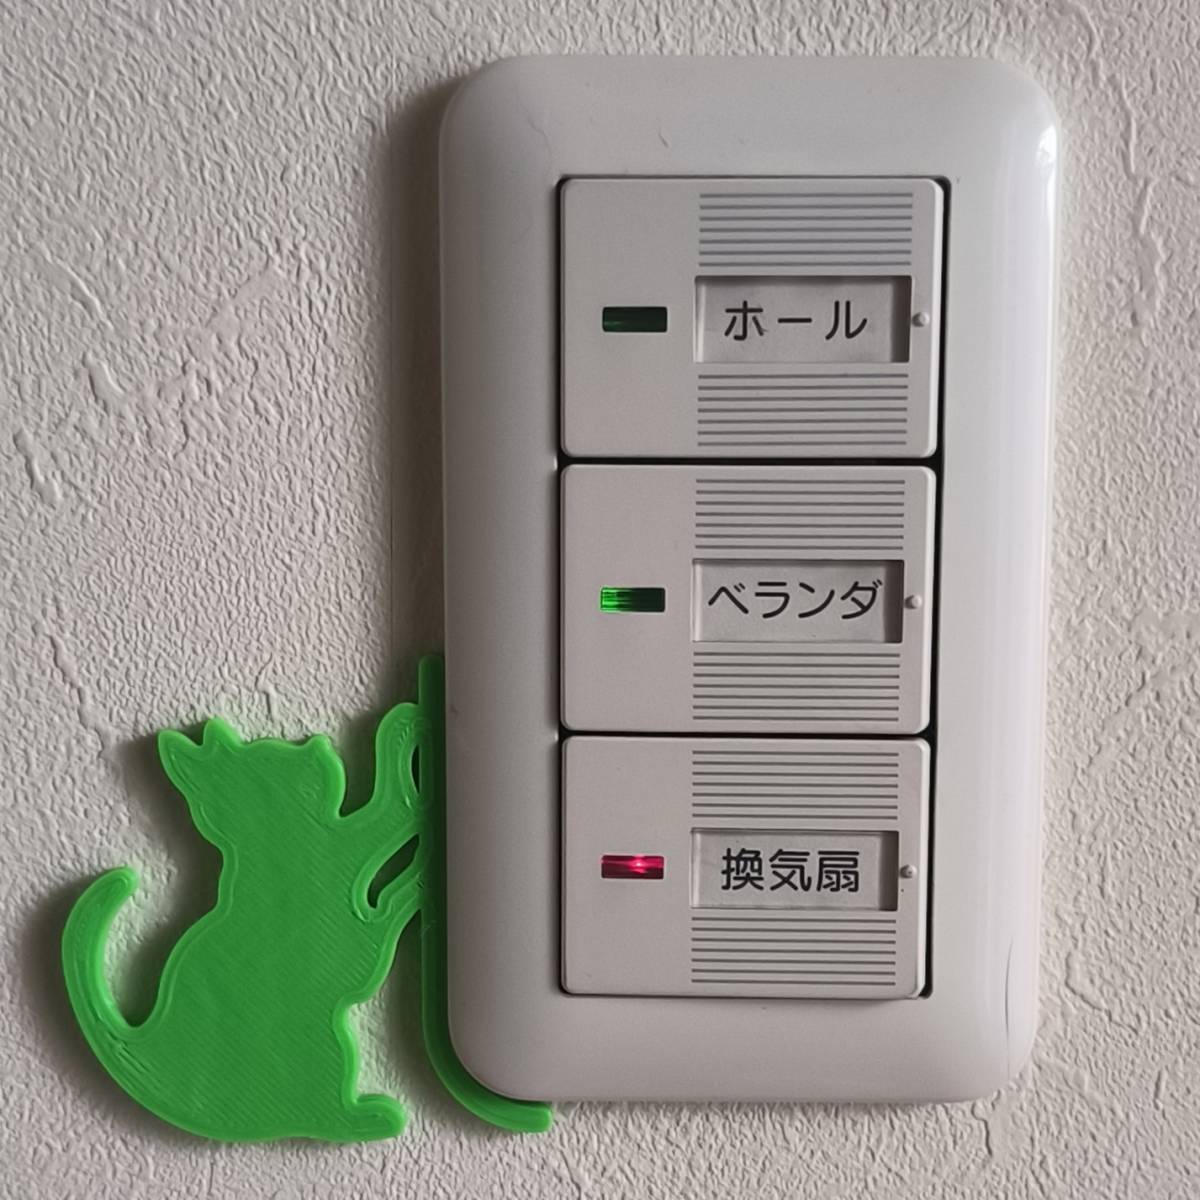 K009-06-N wall switch * outlet cover cat objet d'art 06.